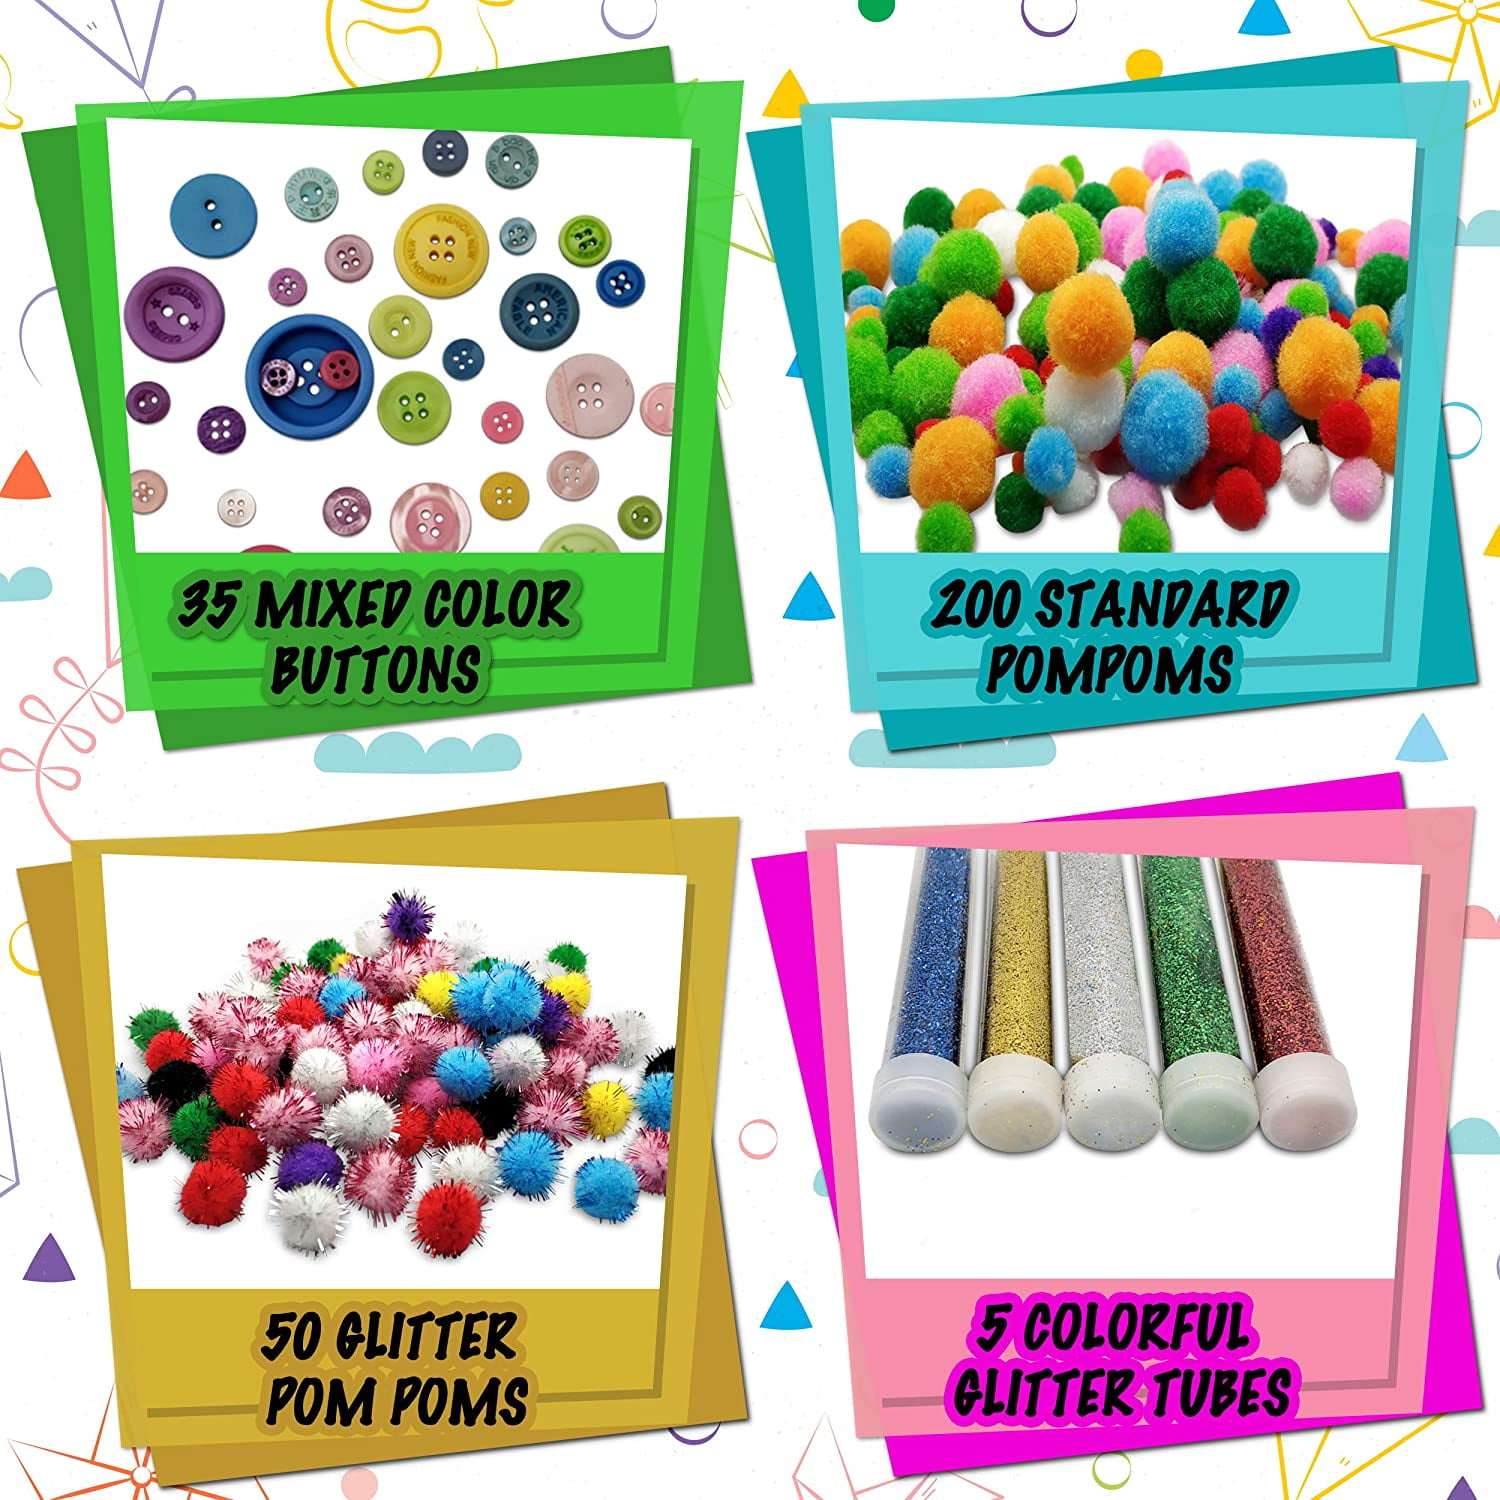 1500x Arts & Craft Supplies, Materials Educational Gift with Color